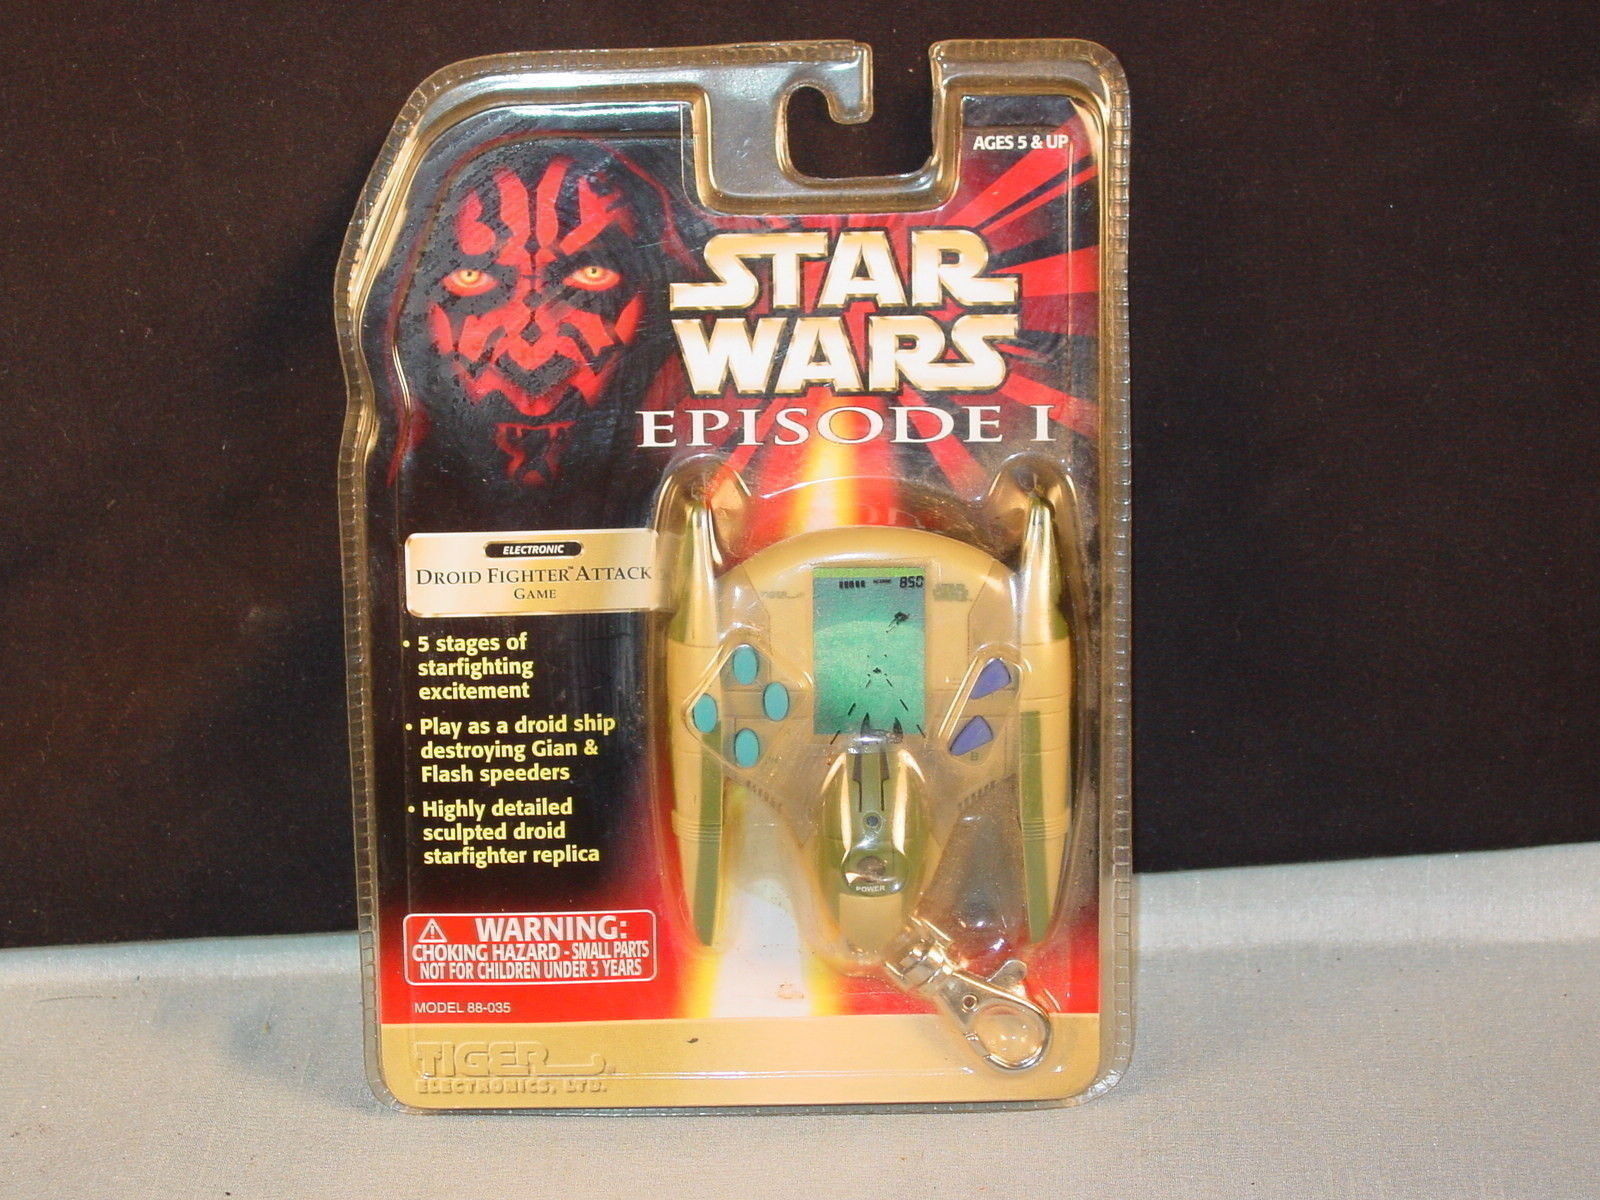 STAR WARS EPISODE I ELECTRONIC DROID FIGHTER ATTACK GAME IN ORIGNAL PACKAGE 1999